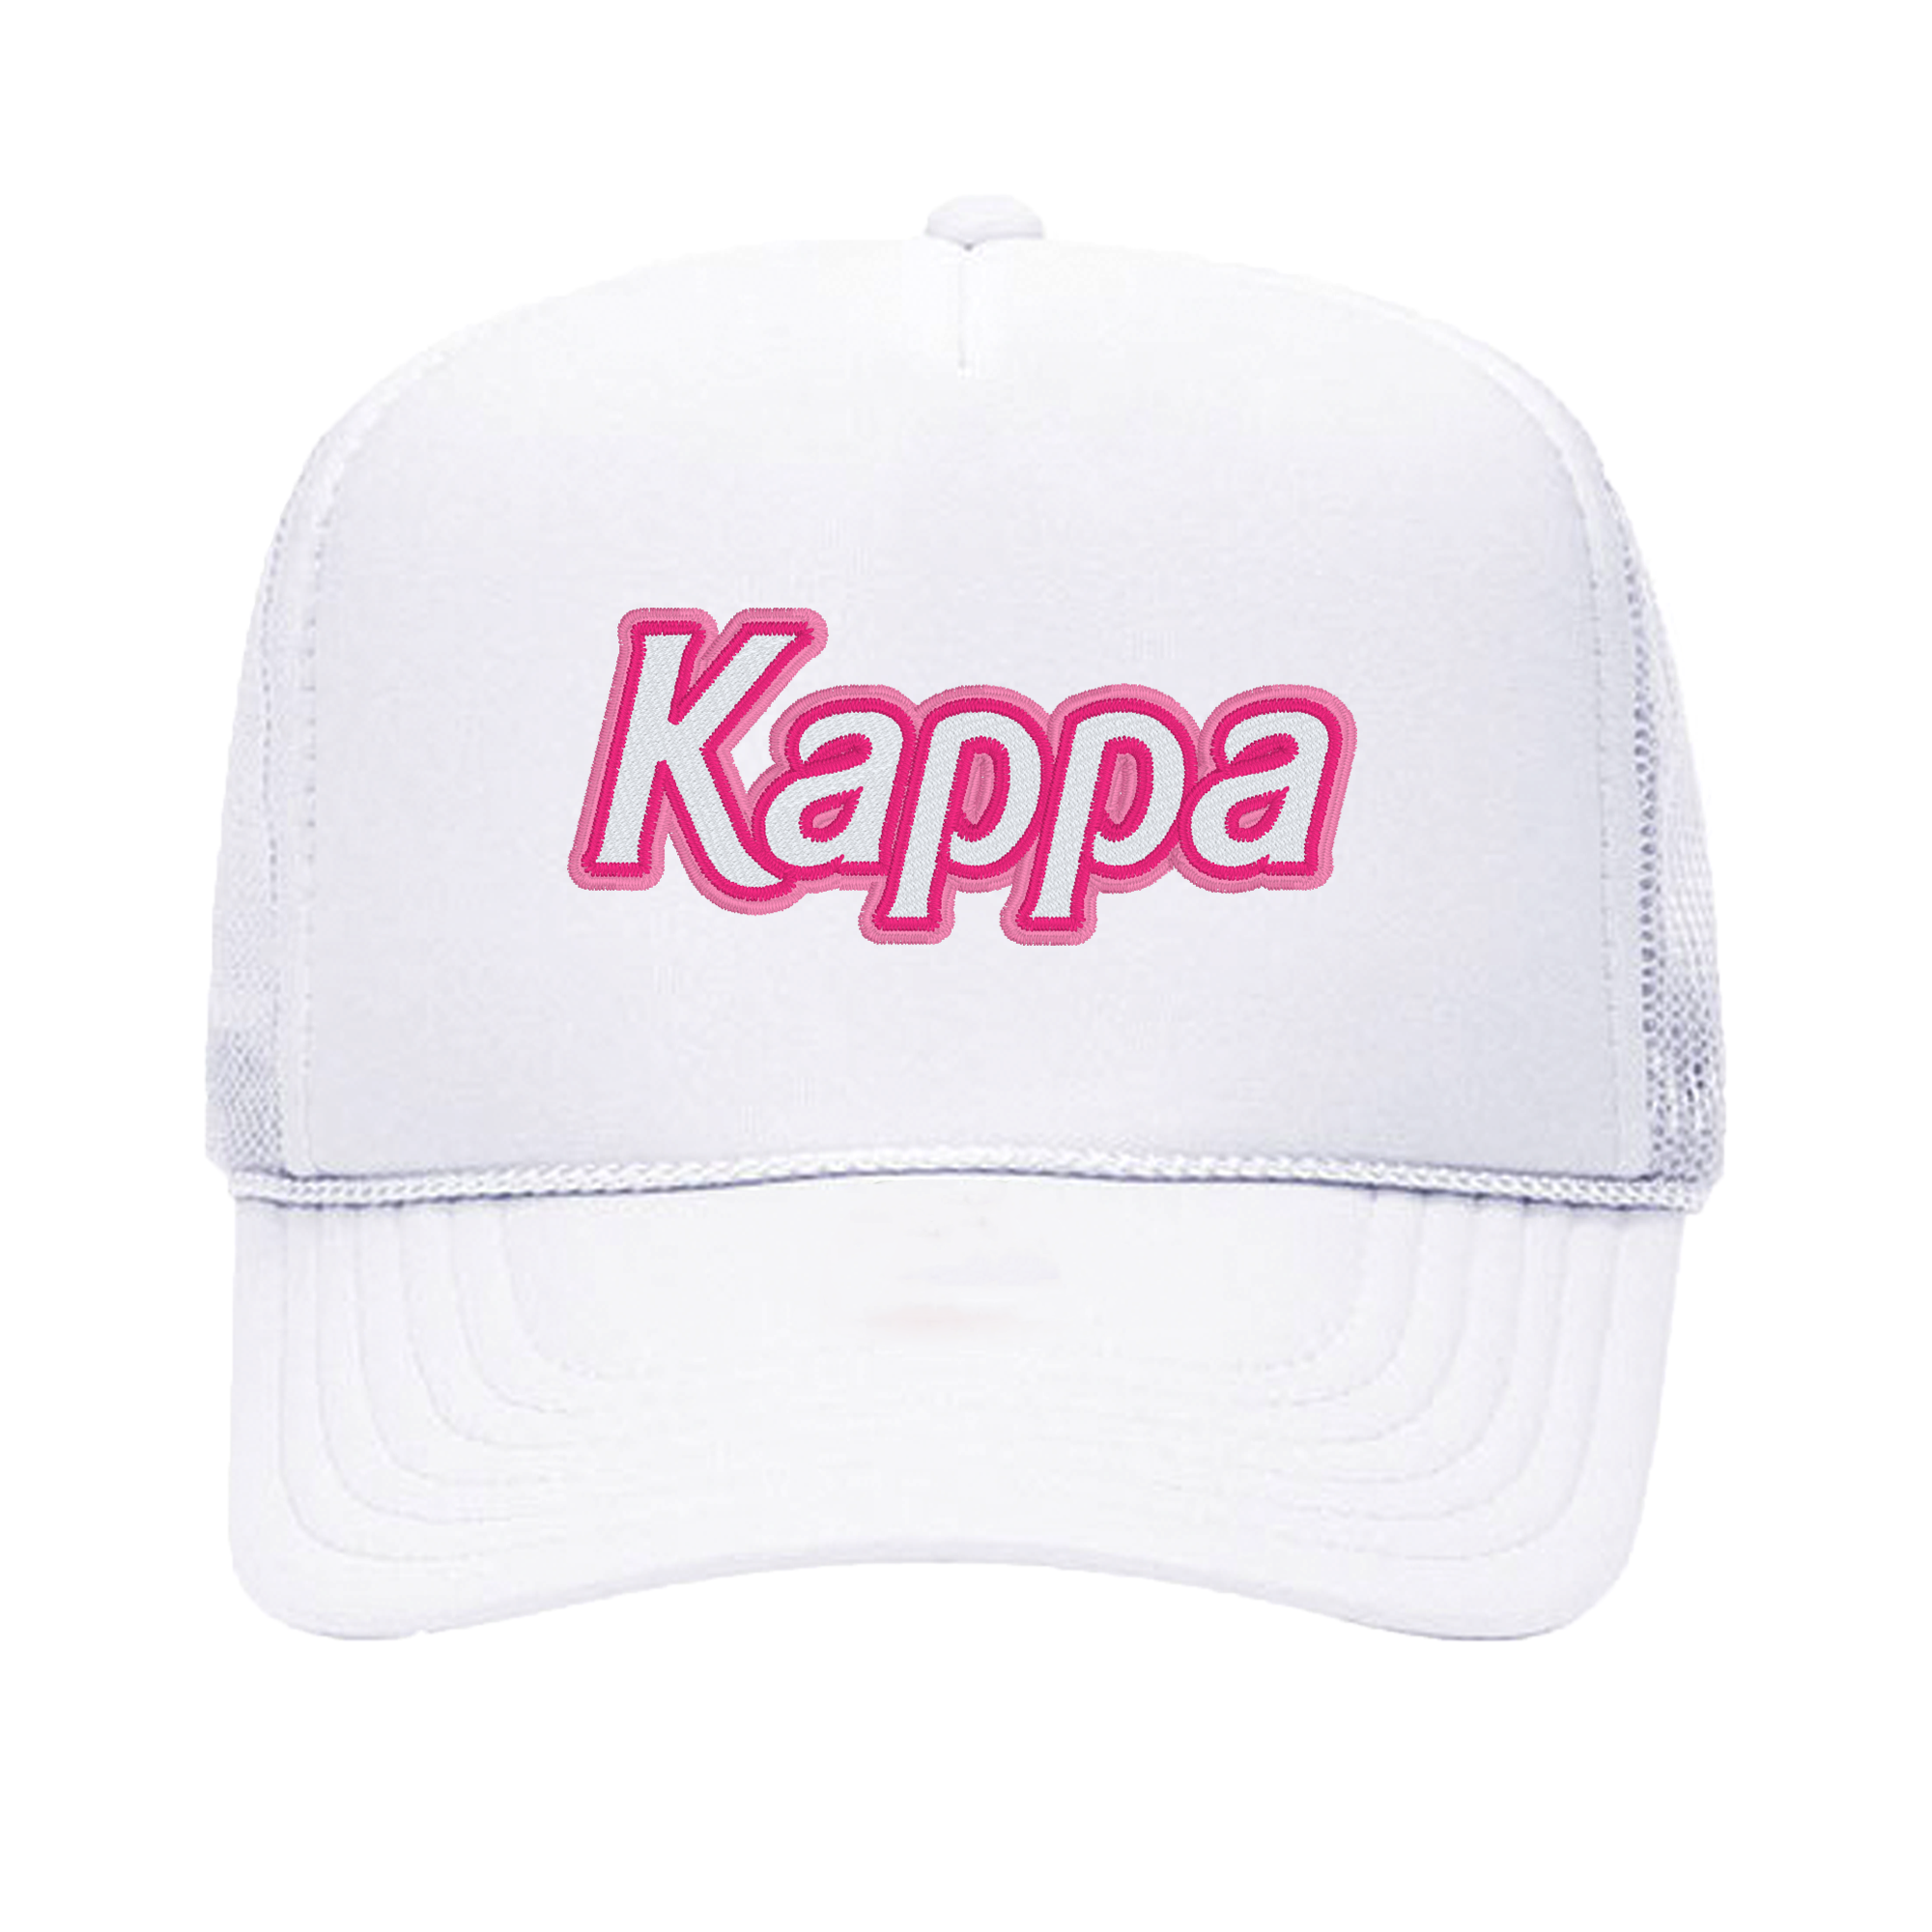 a white cap with the word kappa printed on it